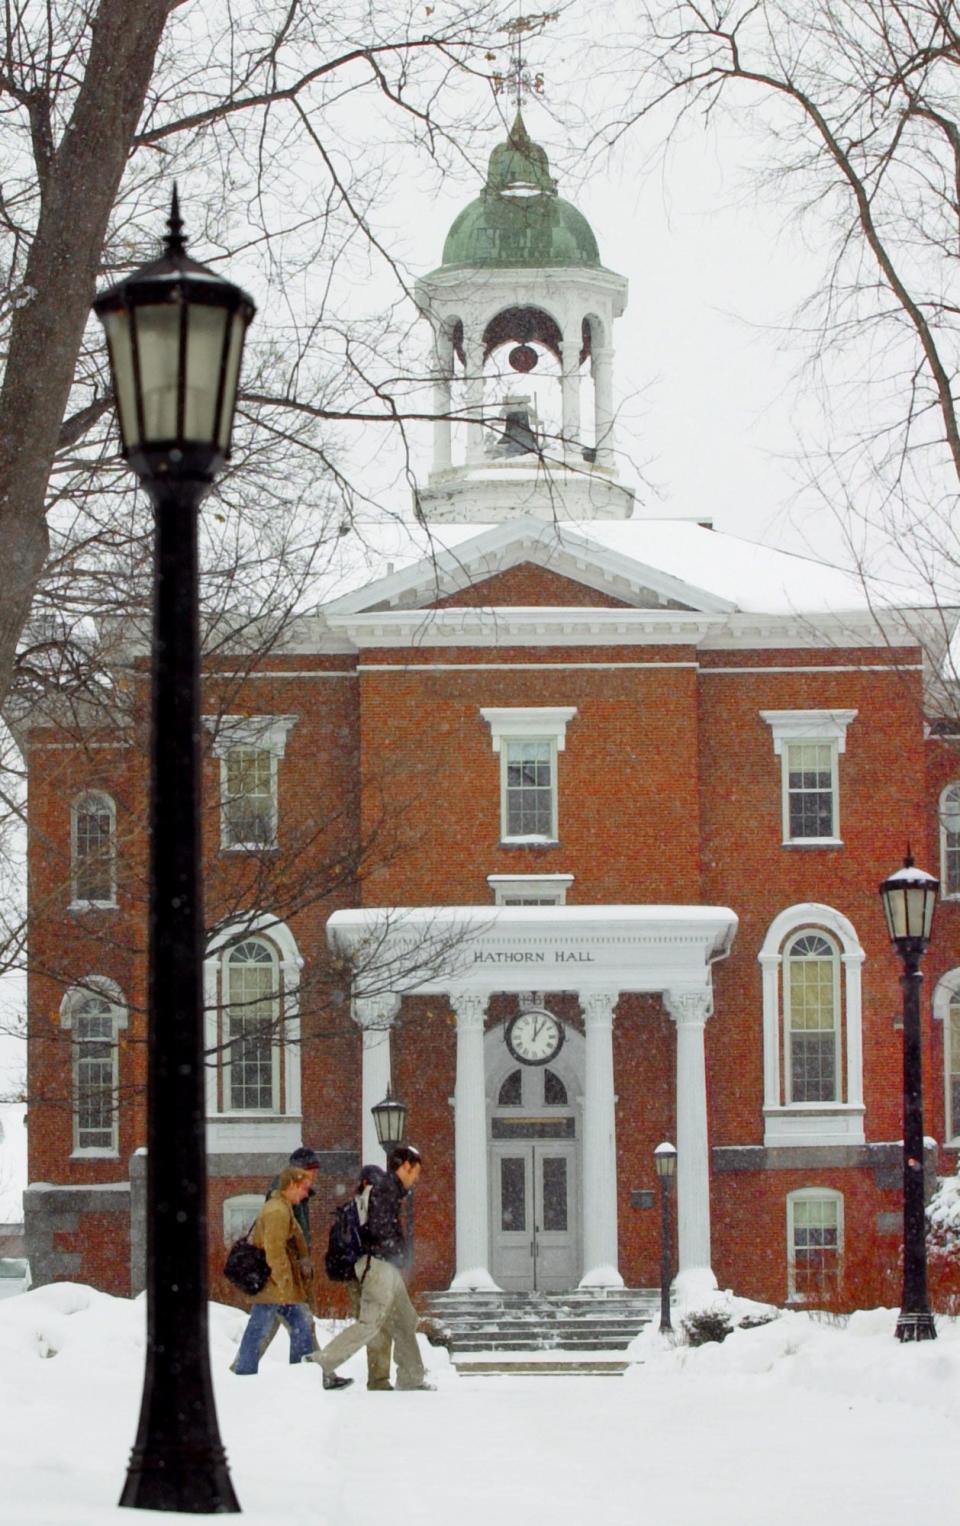 Students make their way across campus past Hathorn Hall during a snow storm at Bates College in Lewiston, Maine, March 1, 2005.